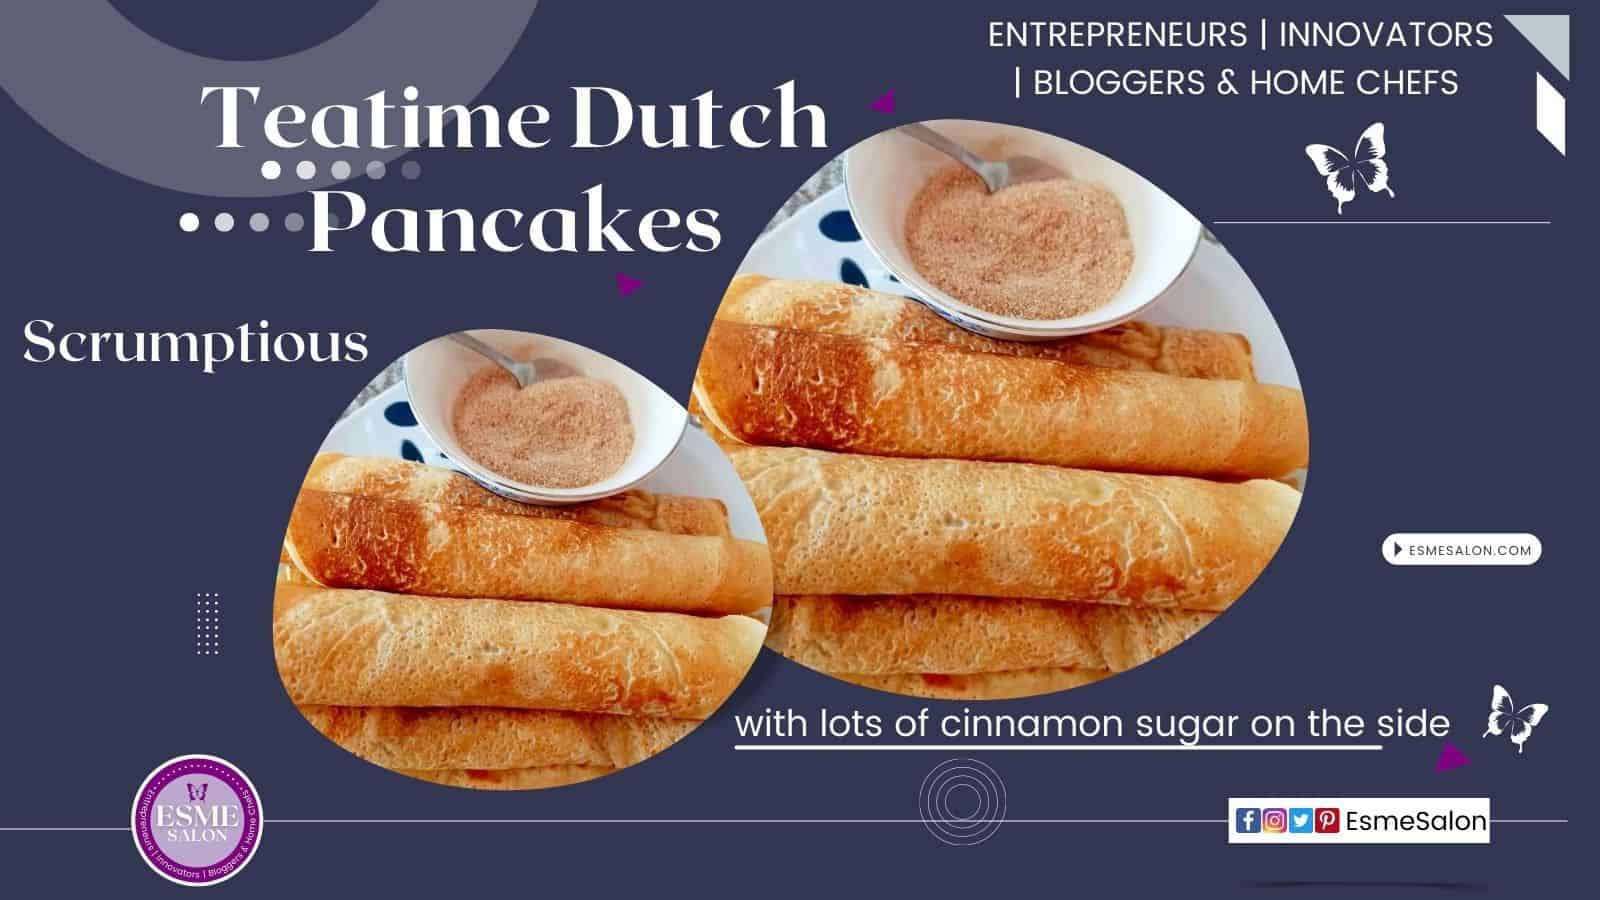 An image with a white place and 5 rolled up Teatime Dutch Pancakes with a bowl of cinnamon sugar on the side